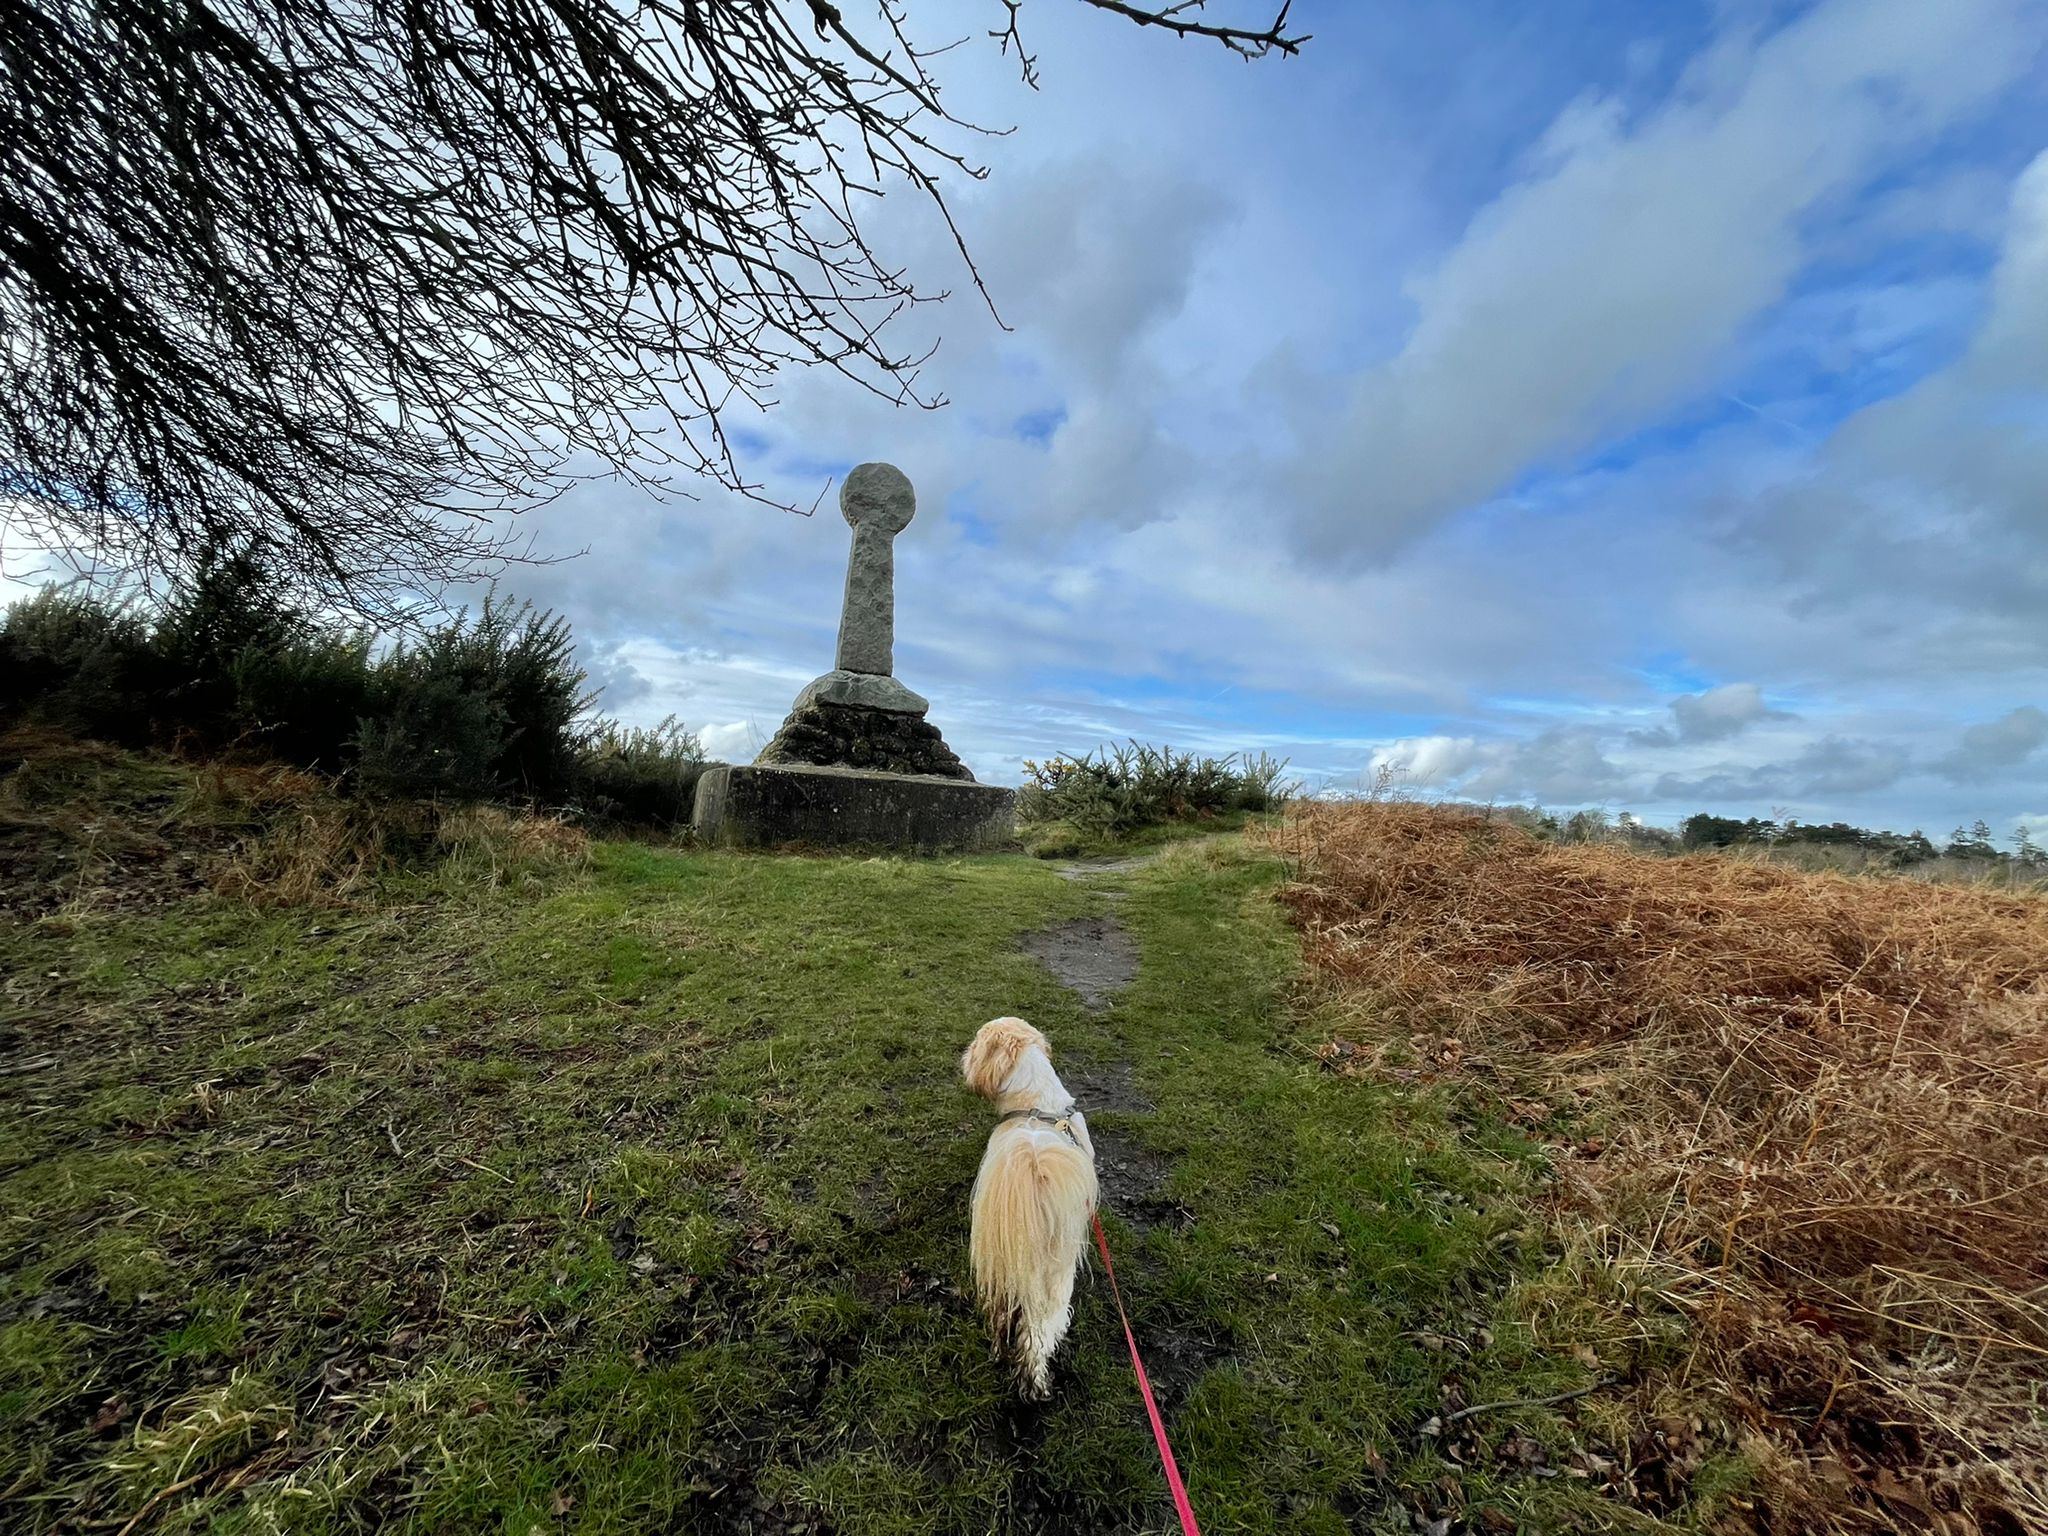 A small beige and white dog approaching a tall stone monument mounted on a stone base. In a heathland setting